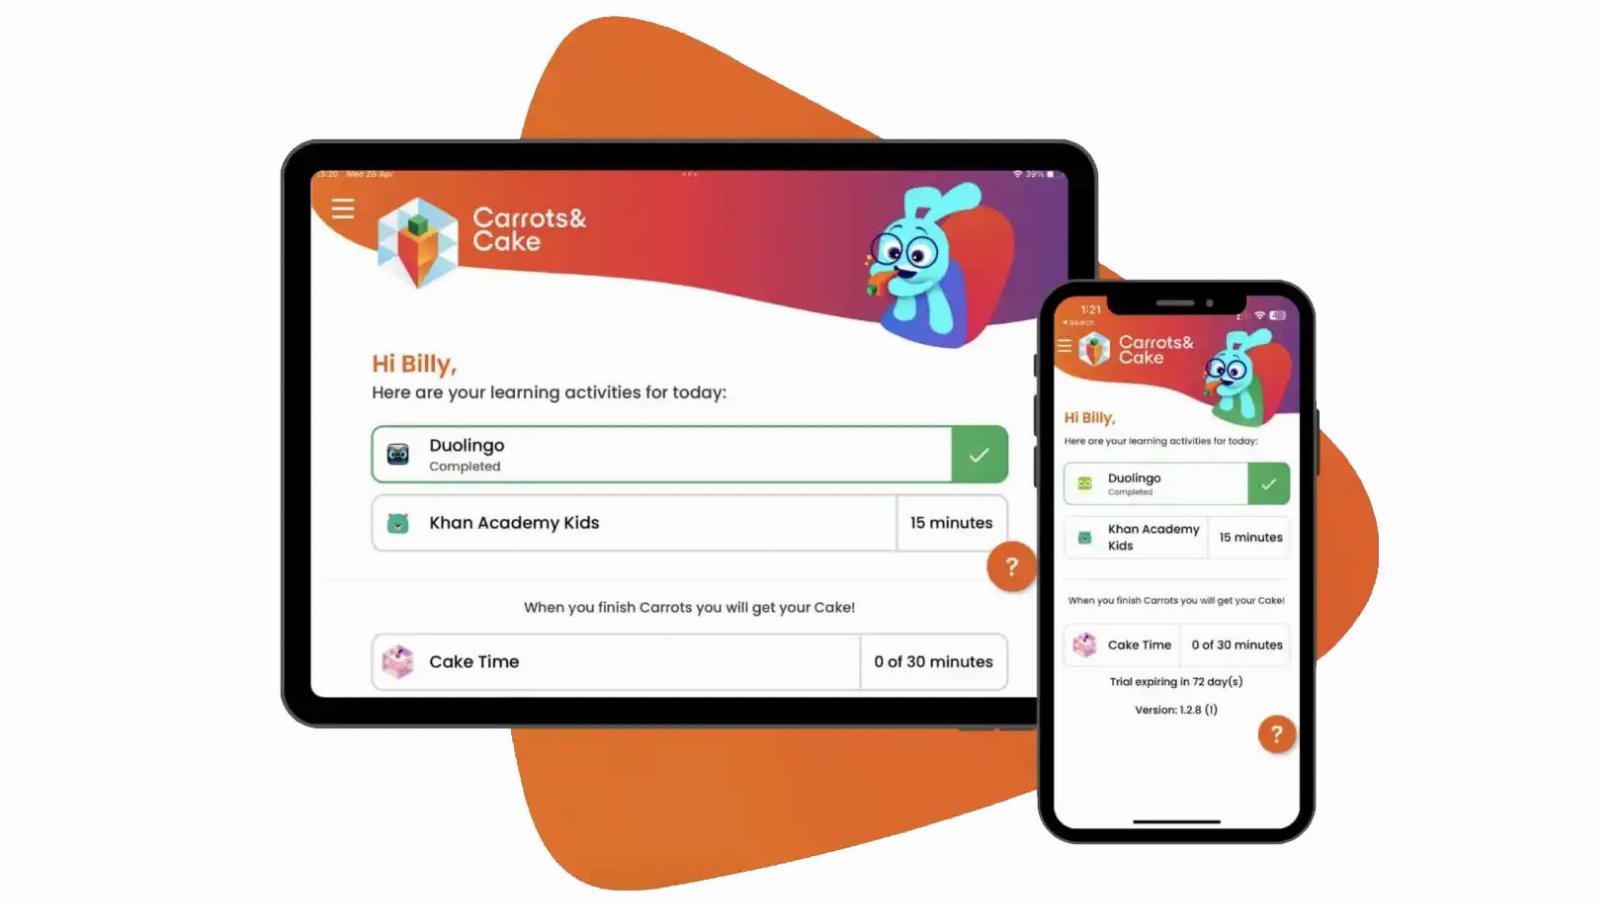 Carrots&Cake wants to help parents make their kids’ screen time more beneficial and less addictive